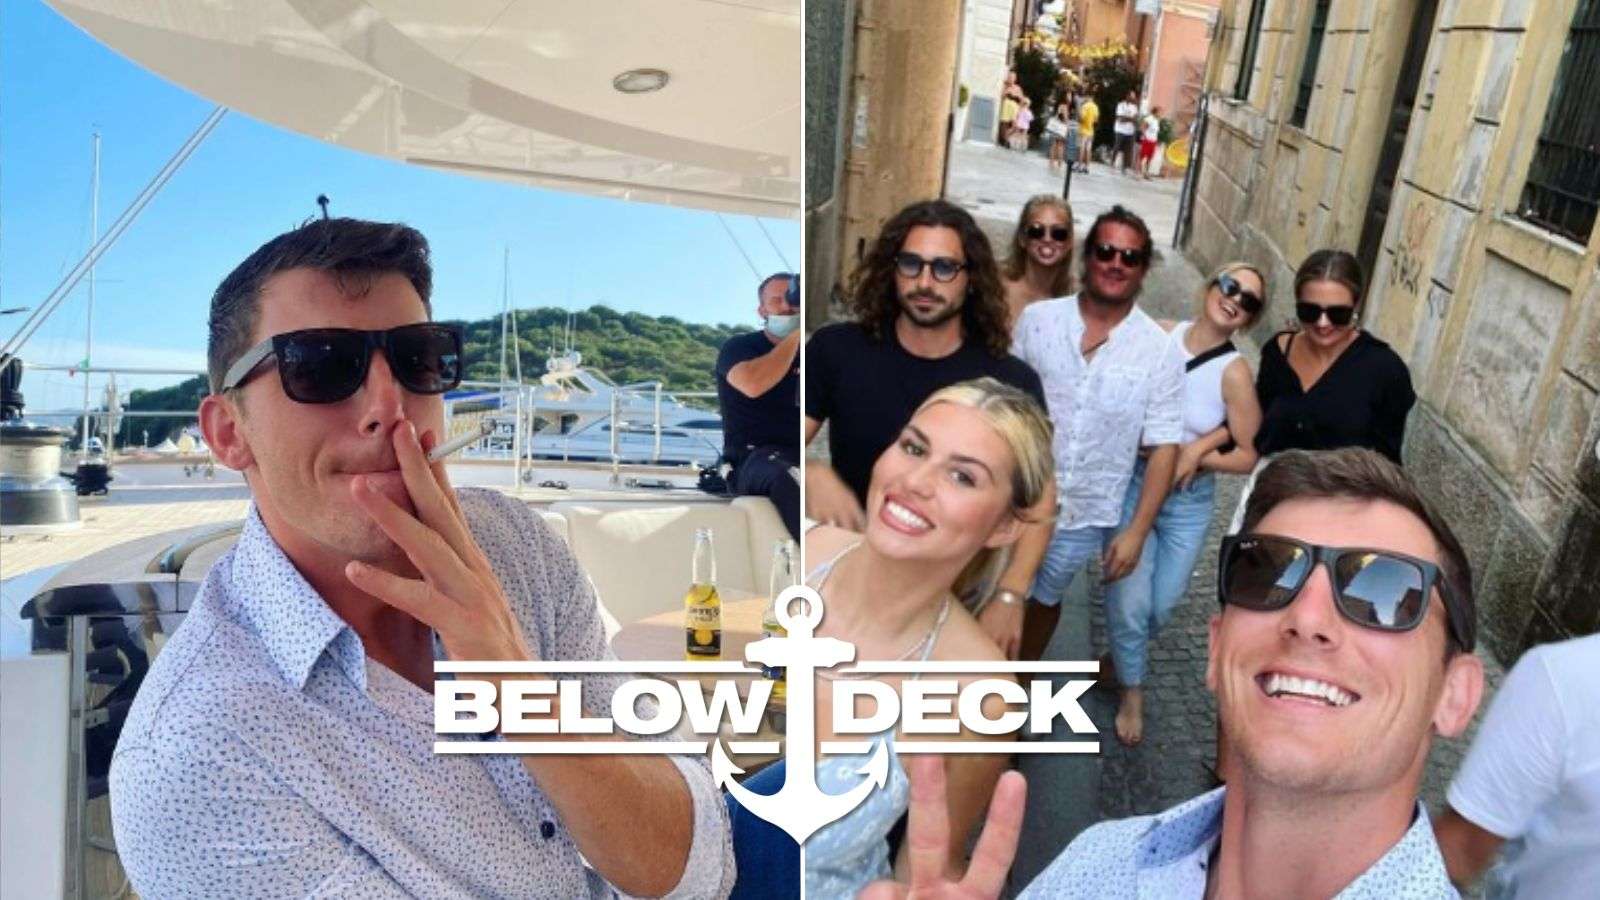 Chase from Below Deck Sailing Yacht Season 4